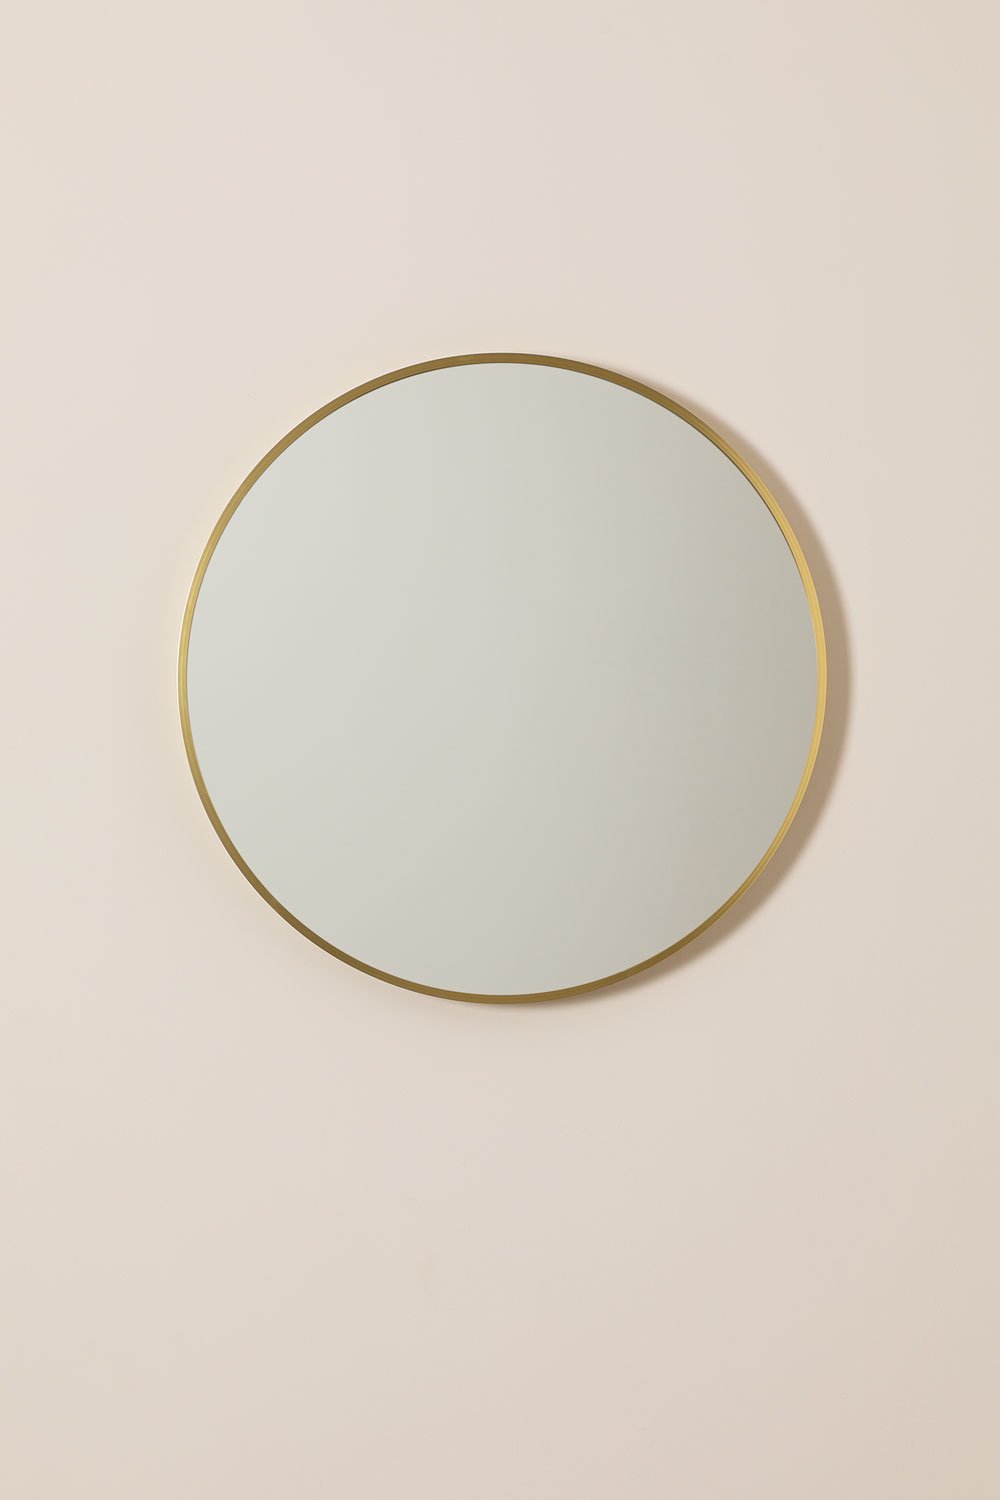 Siloh Gold Metal Bathroom Round Wall Mirror, gallery image 1